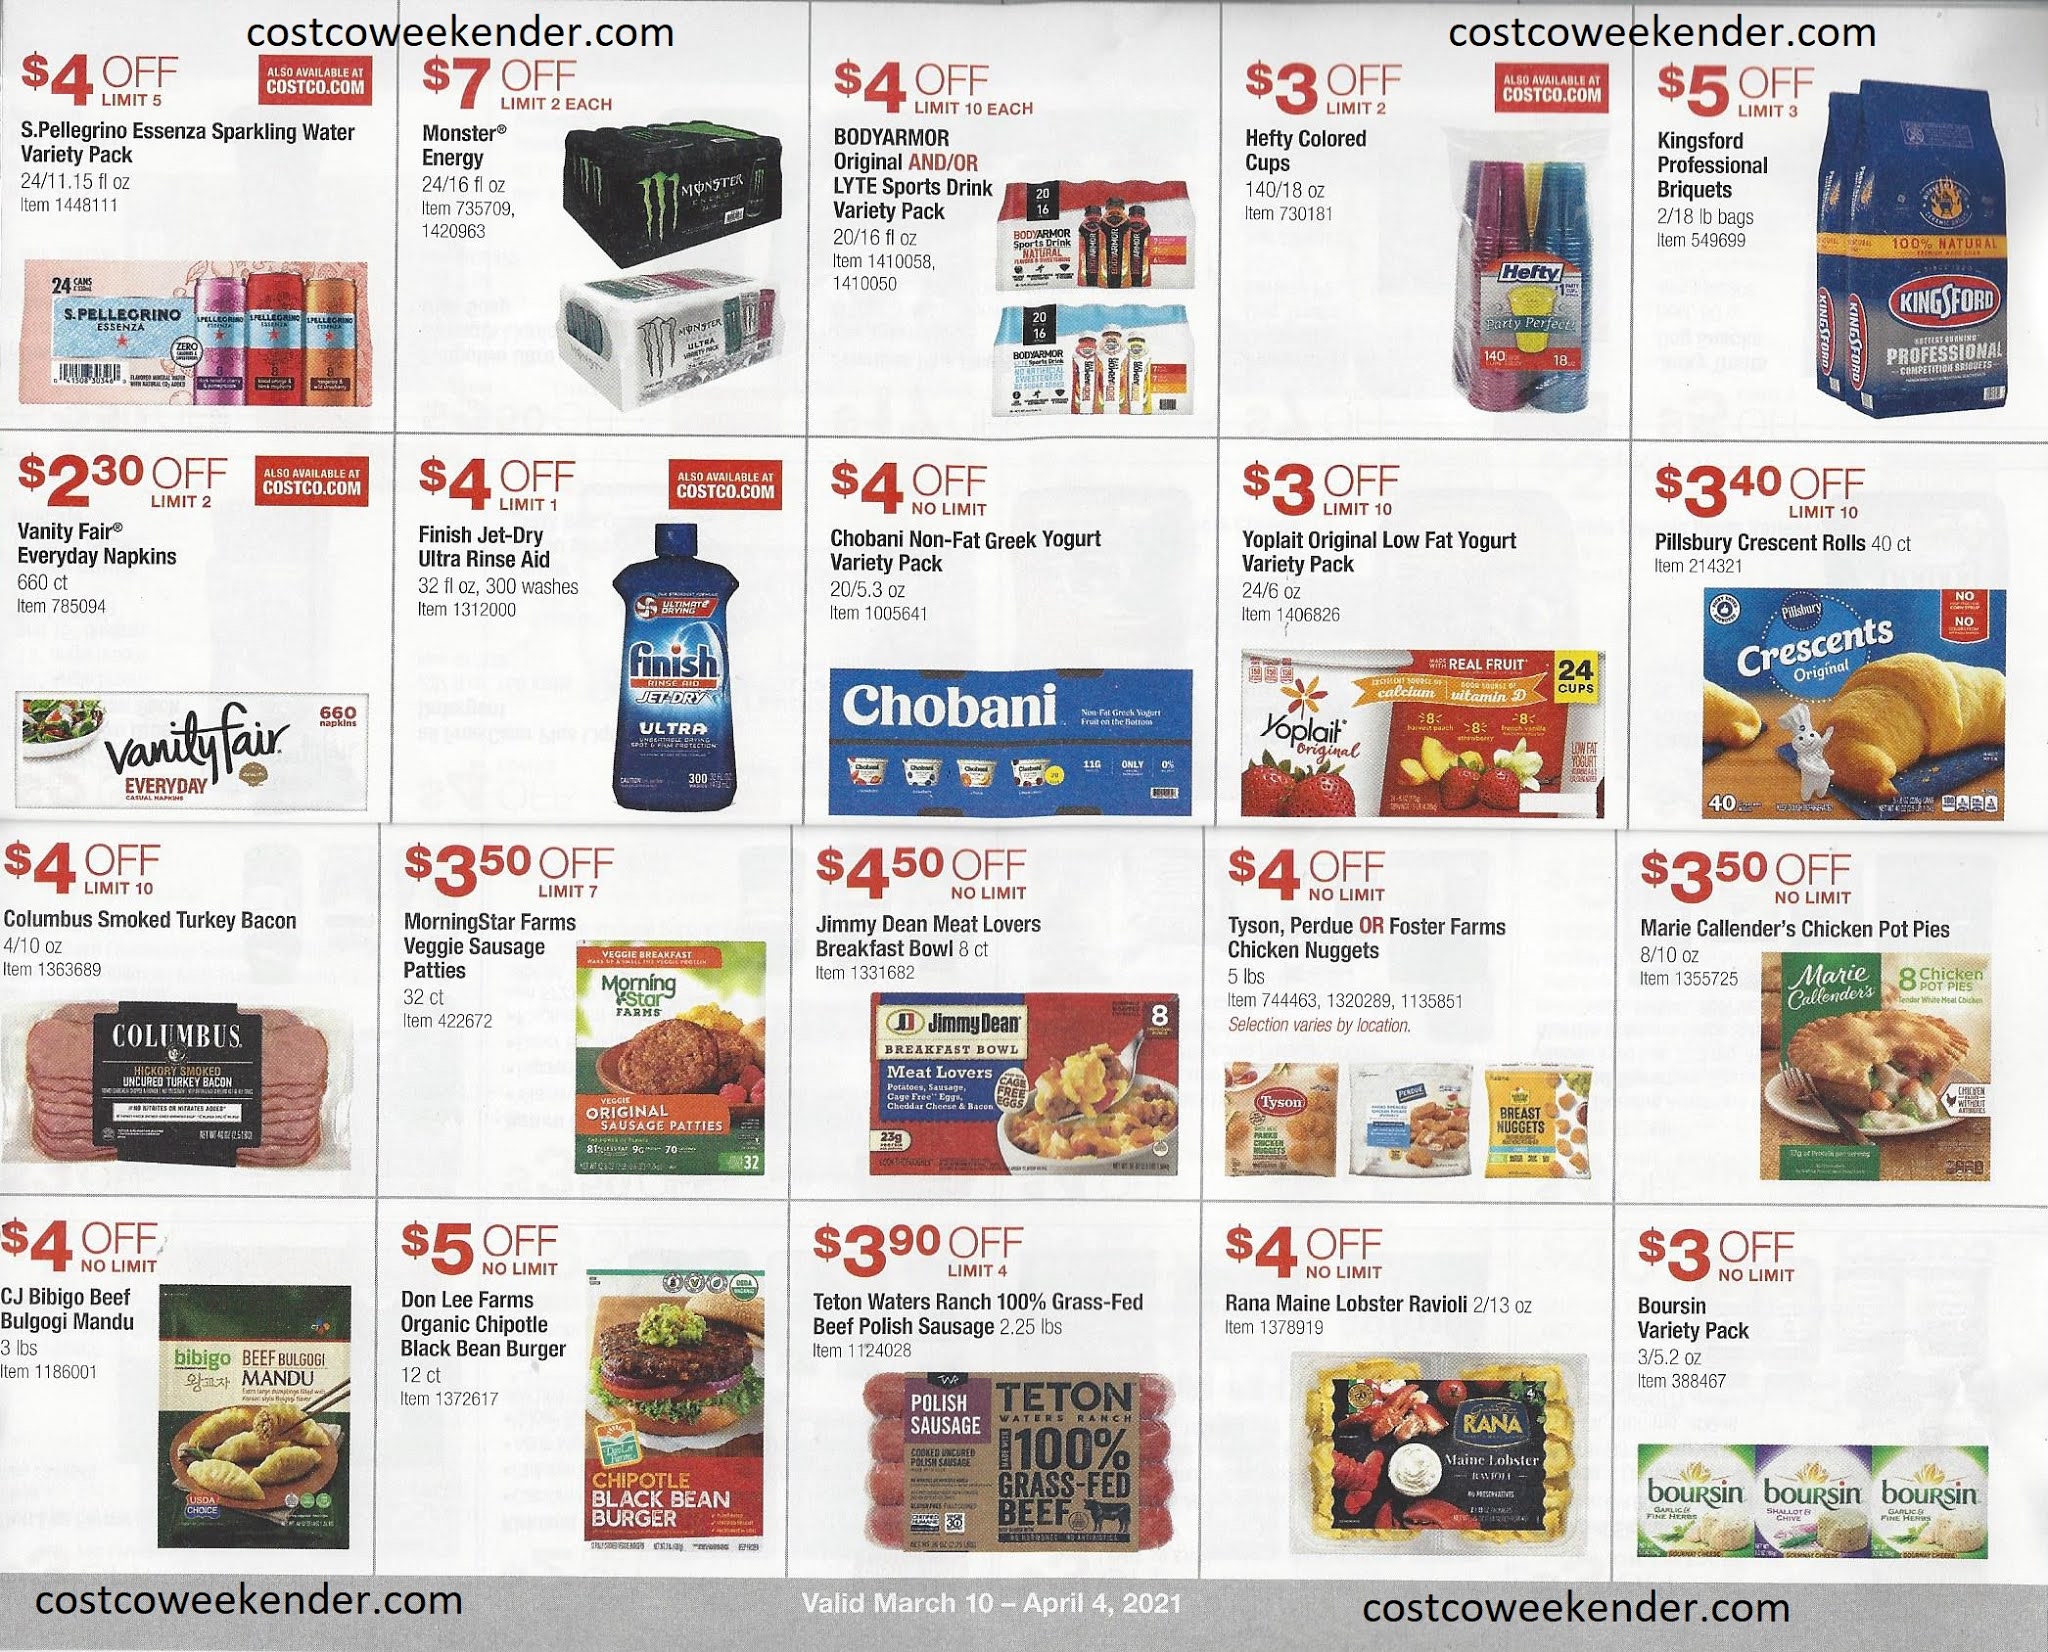 Costco Coupon Book for June/July - wide 5